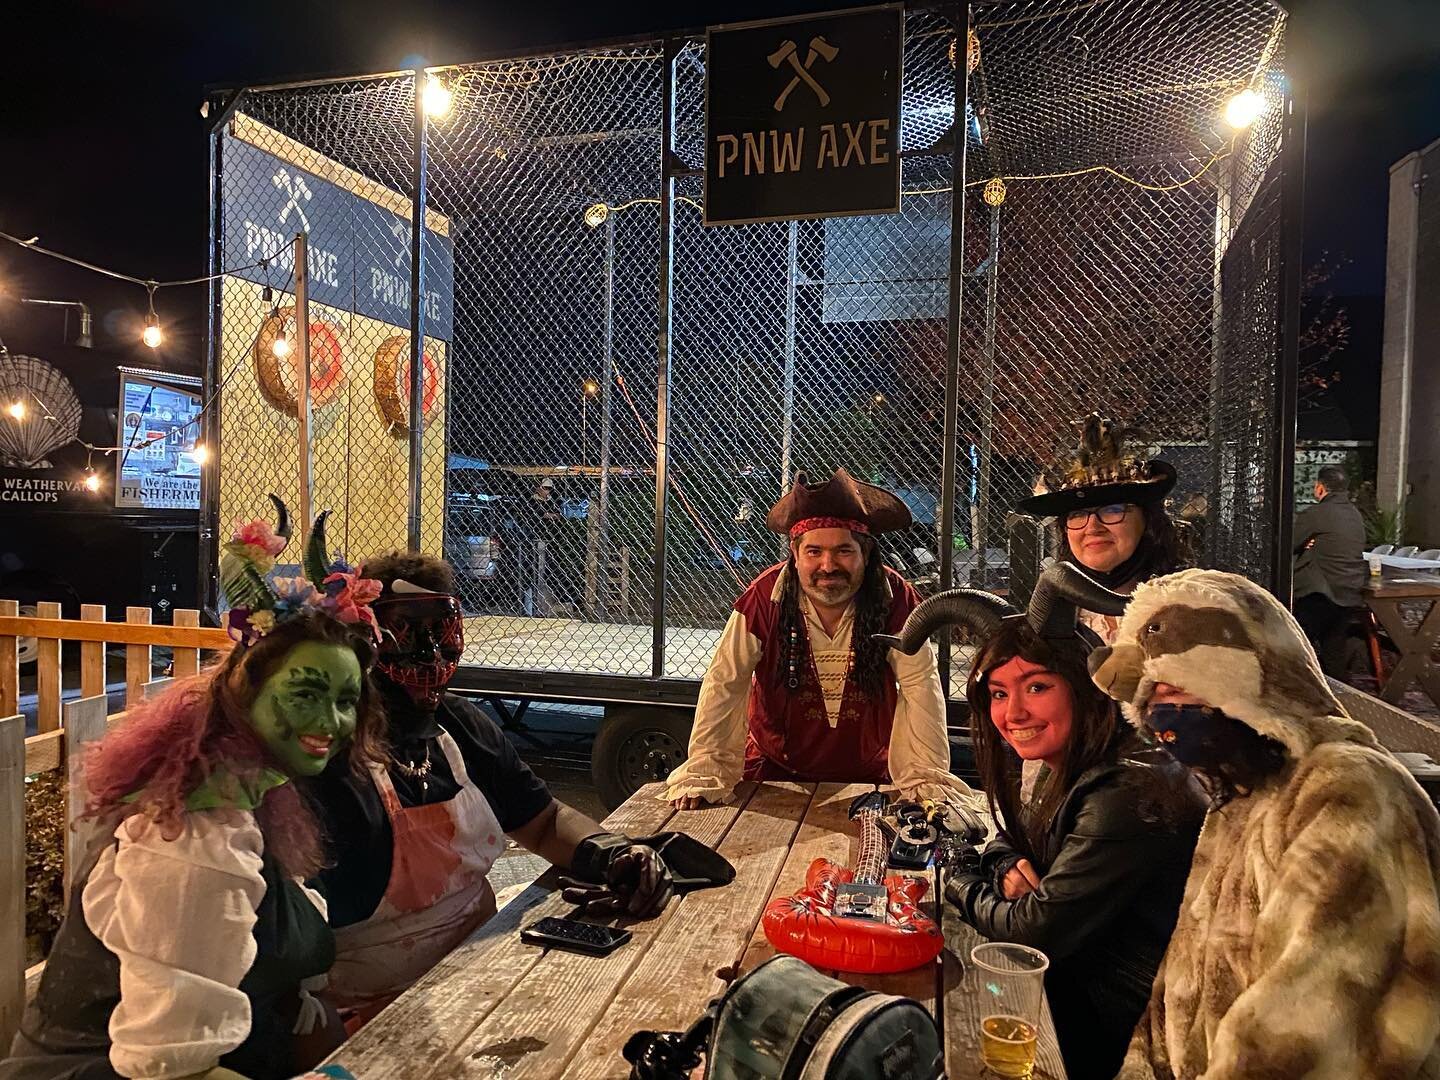 Happy Halloween! We had a great time in Everett at the Halloween Party last night! #pnwaxe